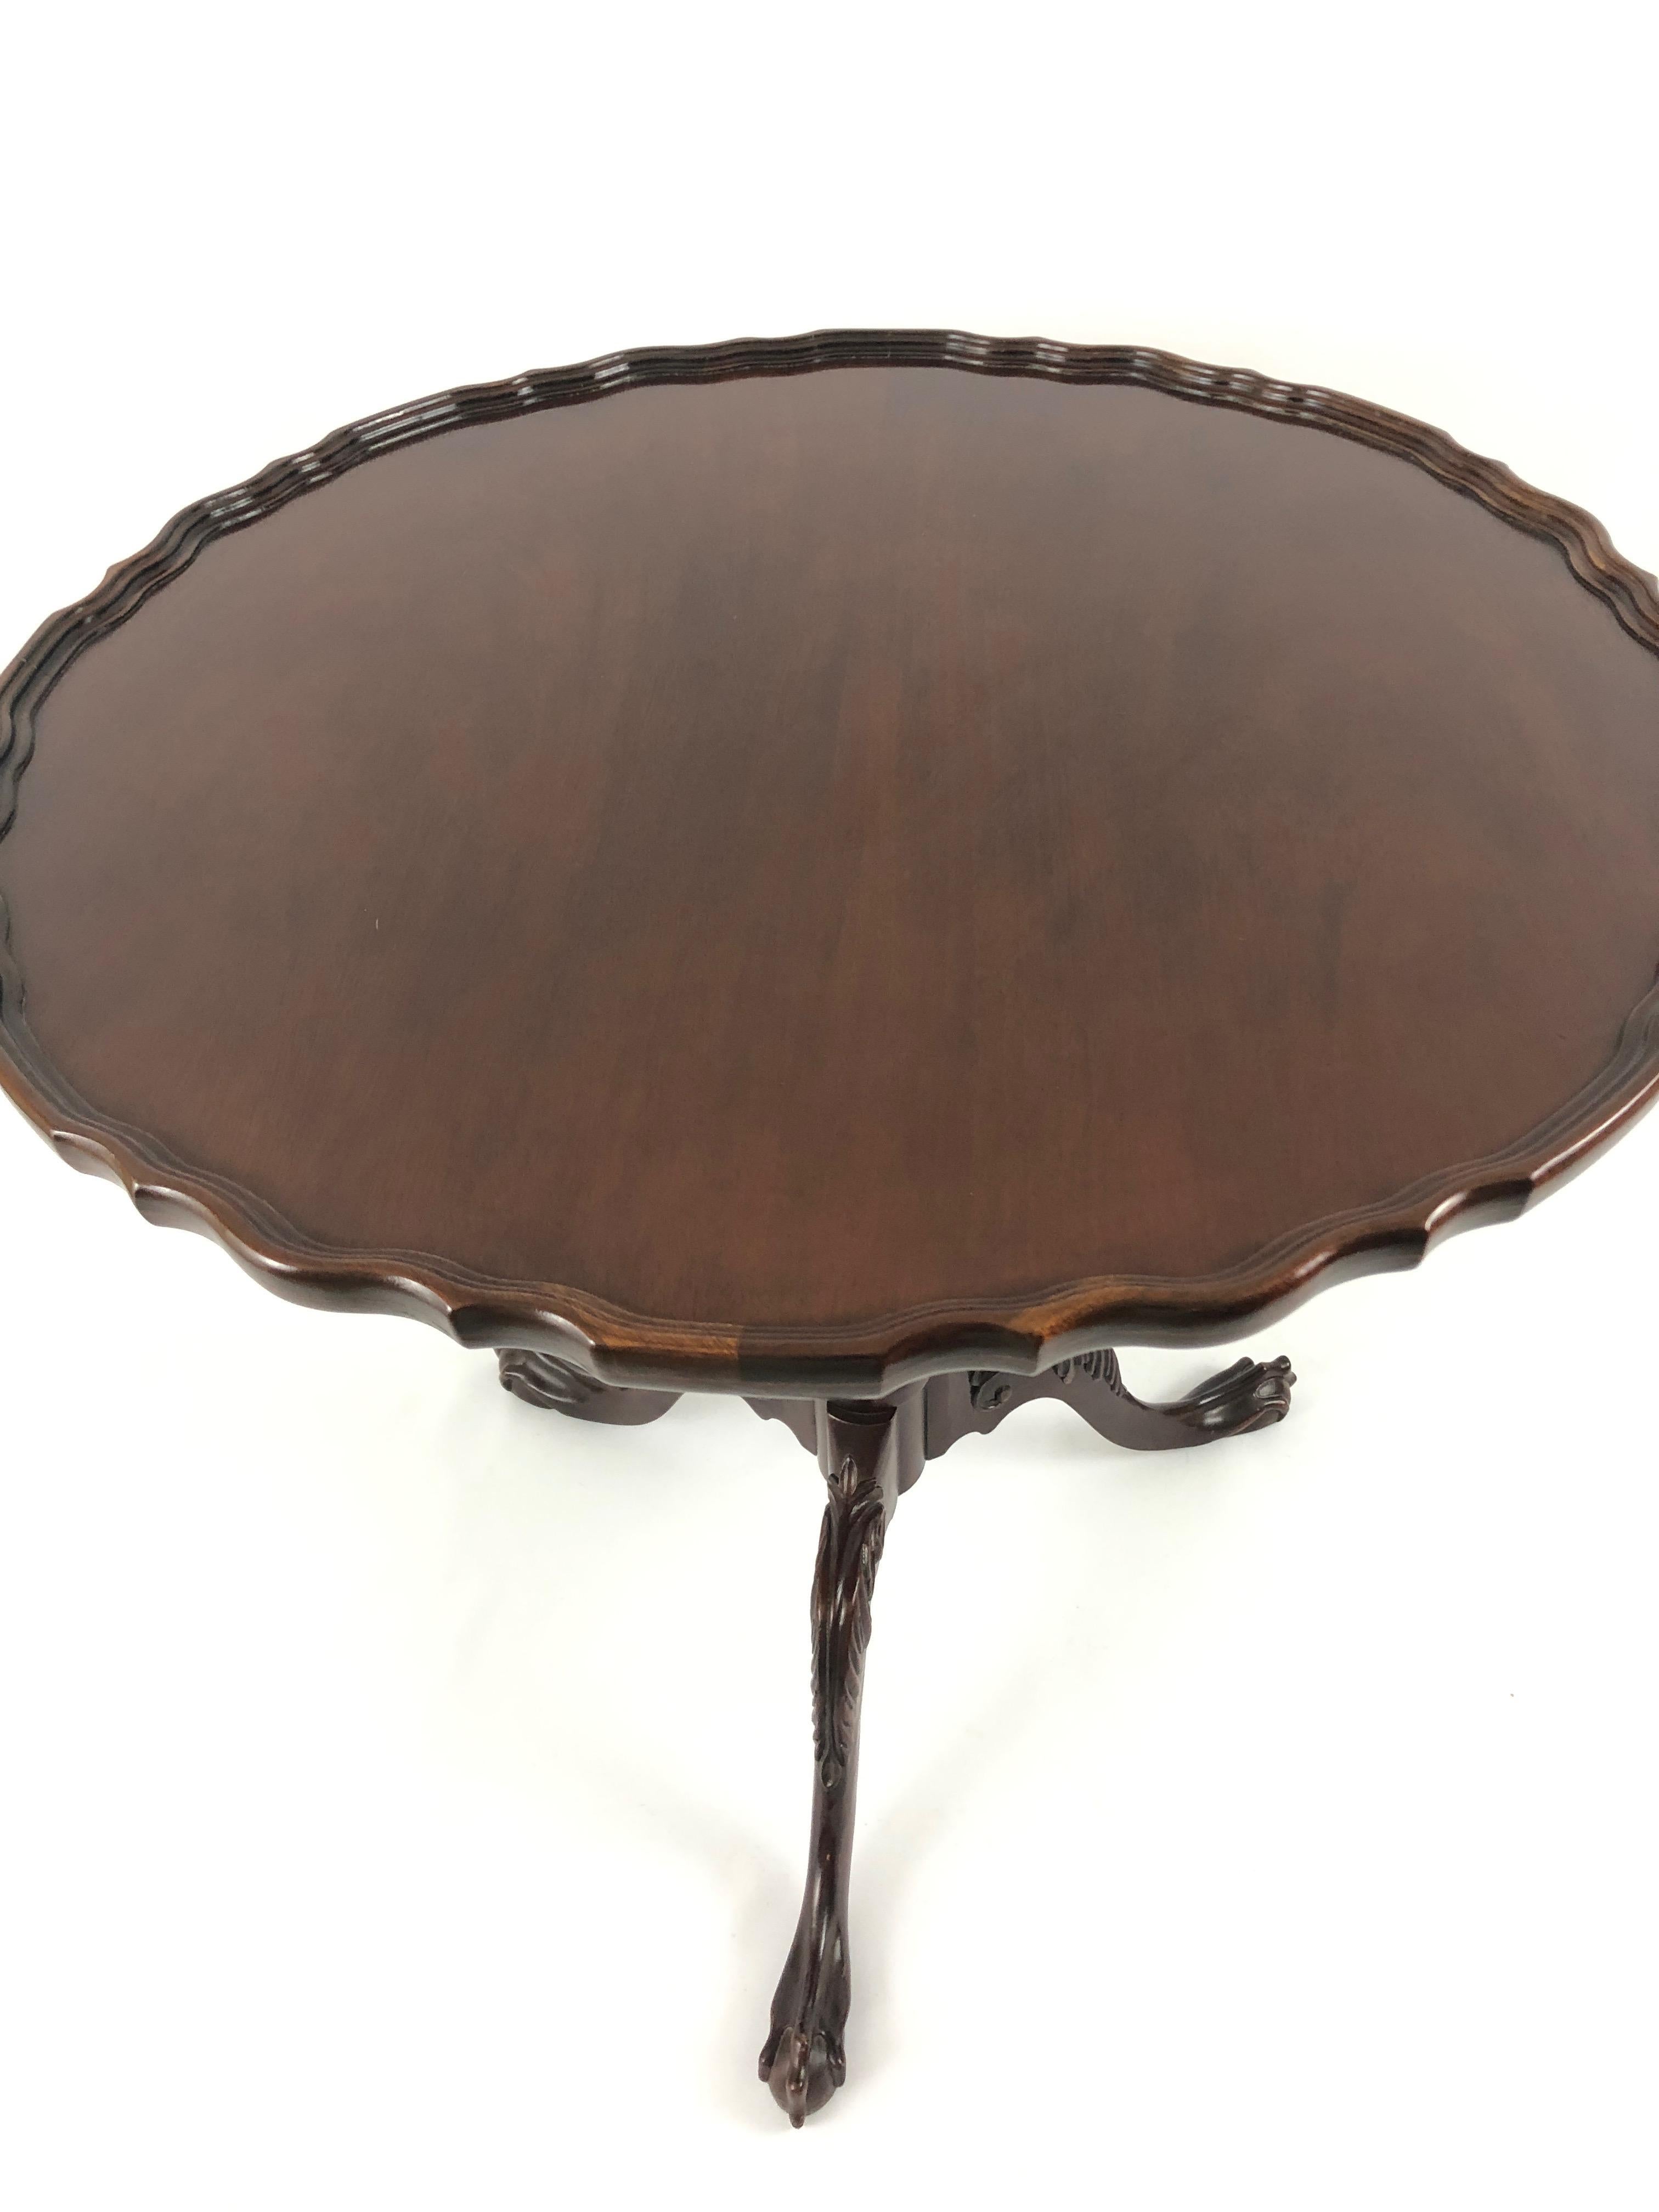 Classically Beautiful Tilt-Top Round Mahogany Side Table by Baker In Excellent Condition For Sale In Hopewell, NJ